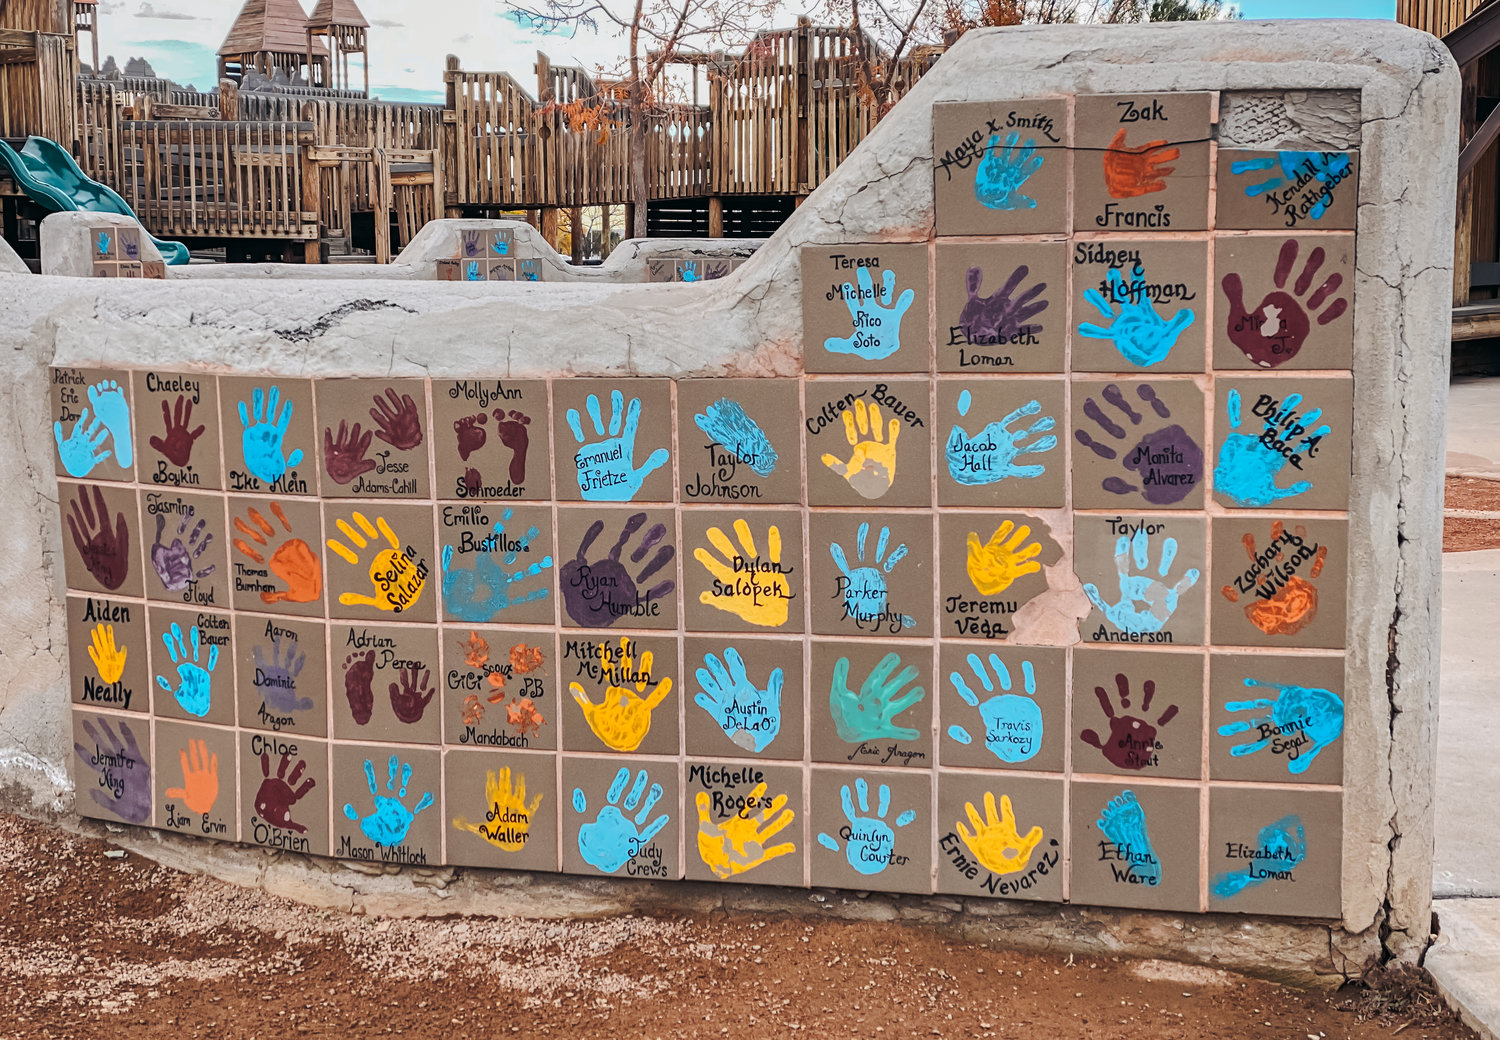 The Unidad Park wall featuring children’s handprints will be preserved as part of the park’s renovation.